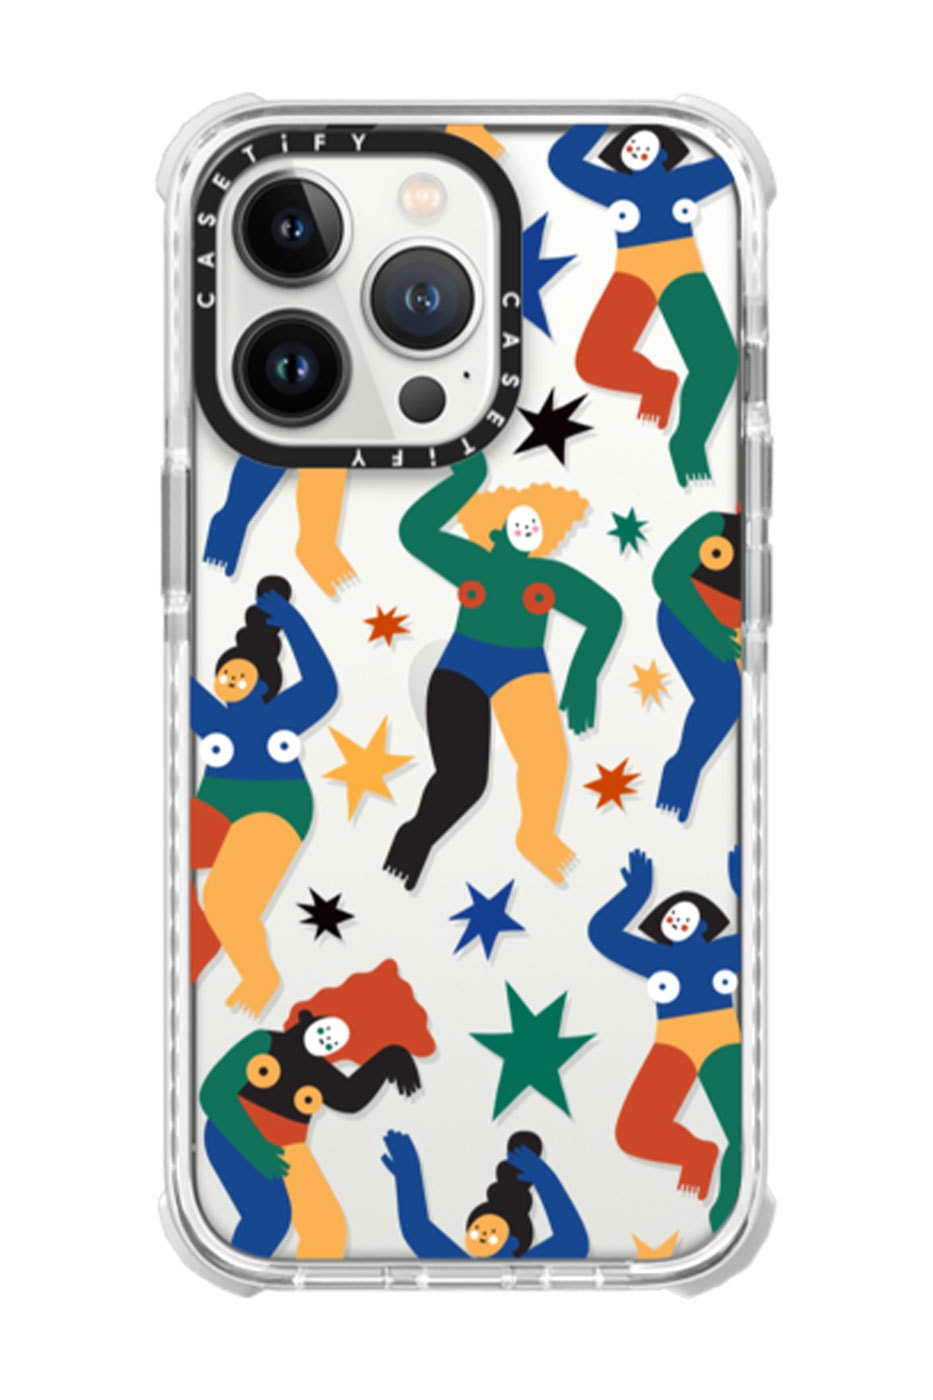 CASETiFY International Womens Day Her Impact Matters Collection Release Info Buy Price AirTag holder AirPod iPhone iPad Cases Apple Watch band Camila Rosa Mel Stringer Gemma Correll Huyen Dinh